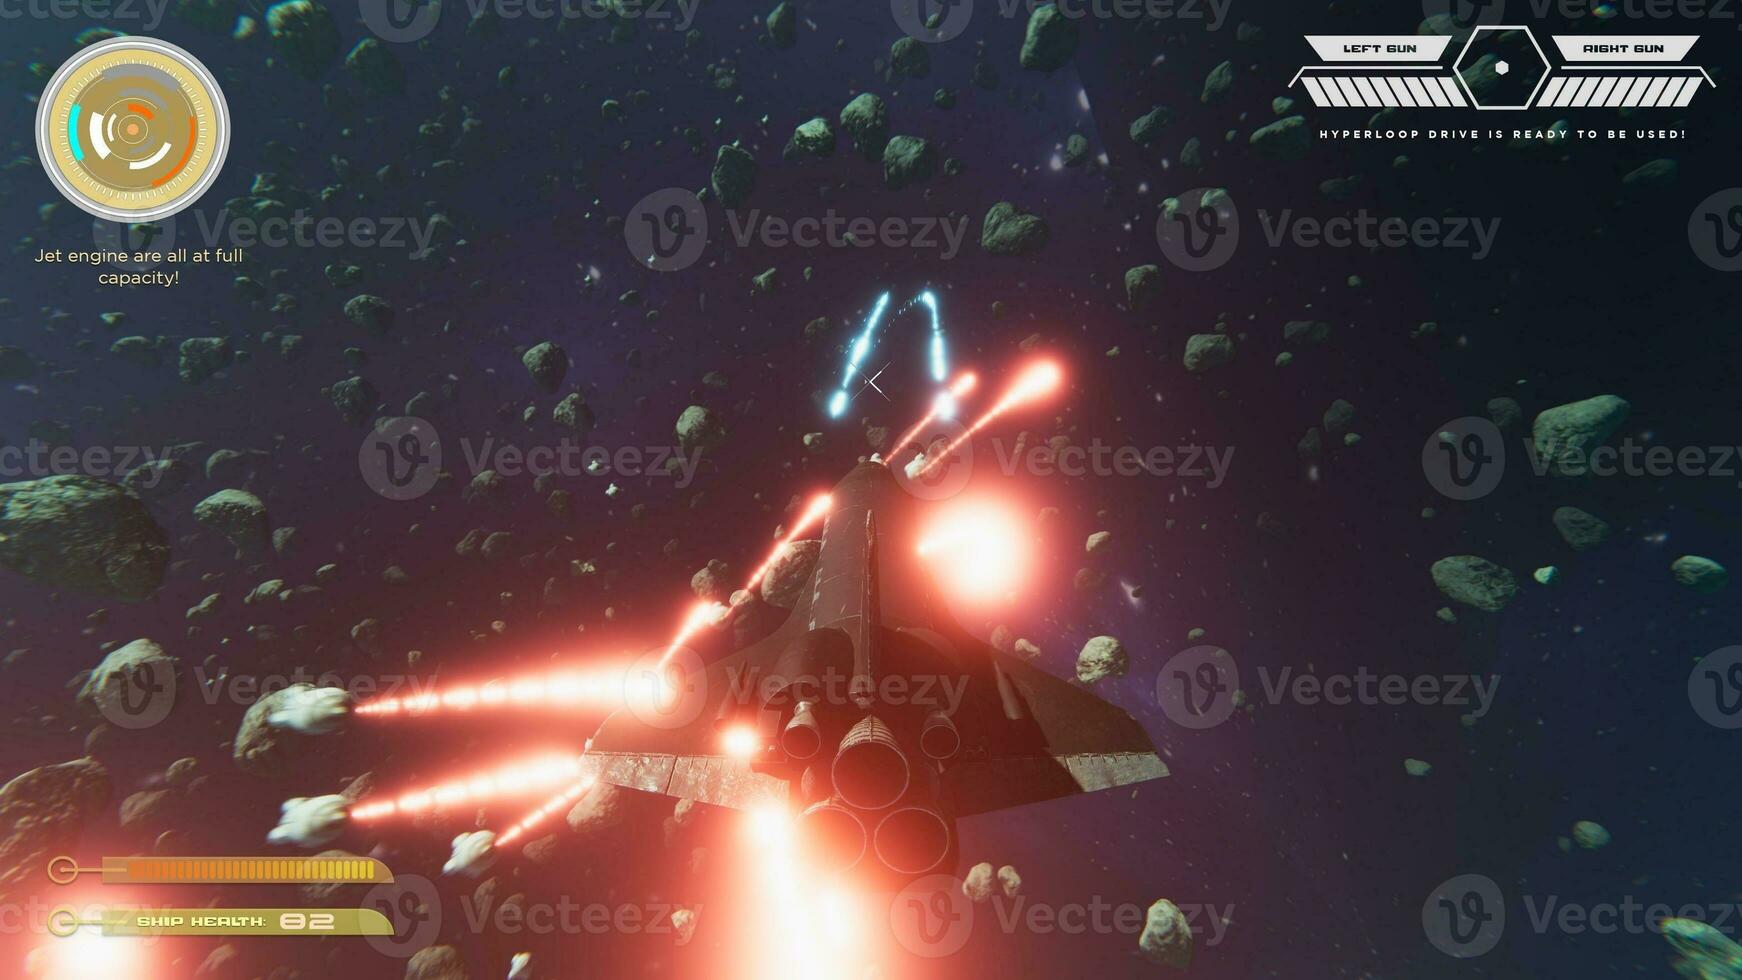 Science fiction singleplayer game with spaceship shooting laser bullets at meteorites using crosshair overlay to accurately hit targets. Spacecraft flying in cosmos, ray tracing graphics and high FPS photo